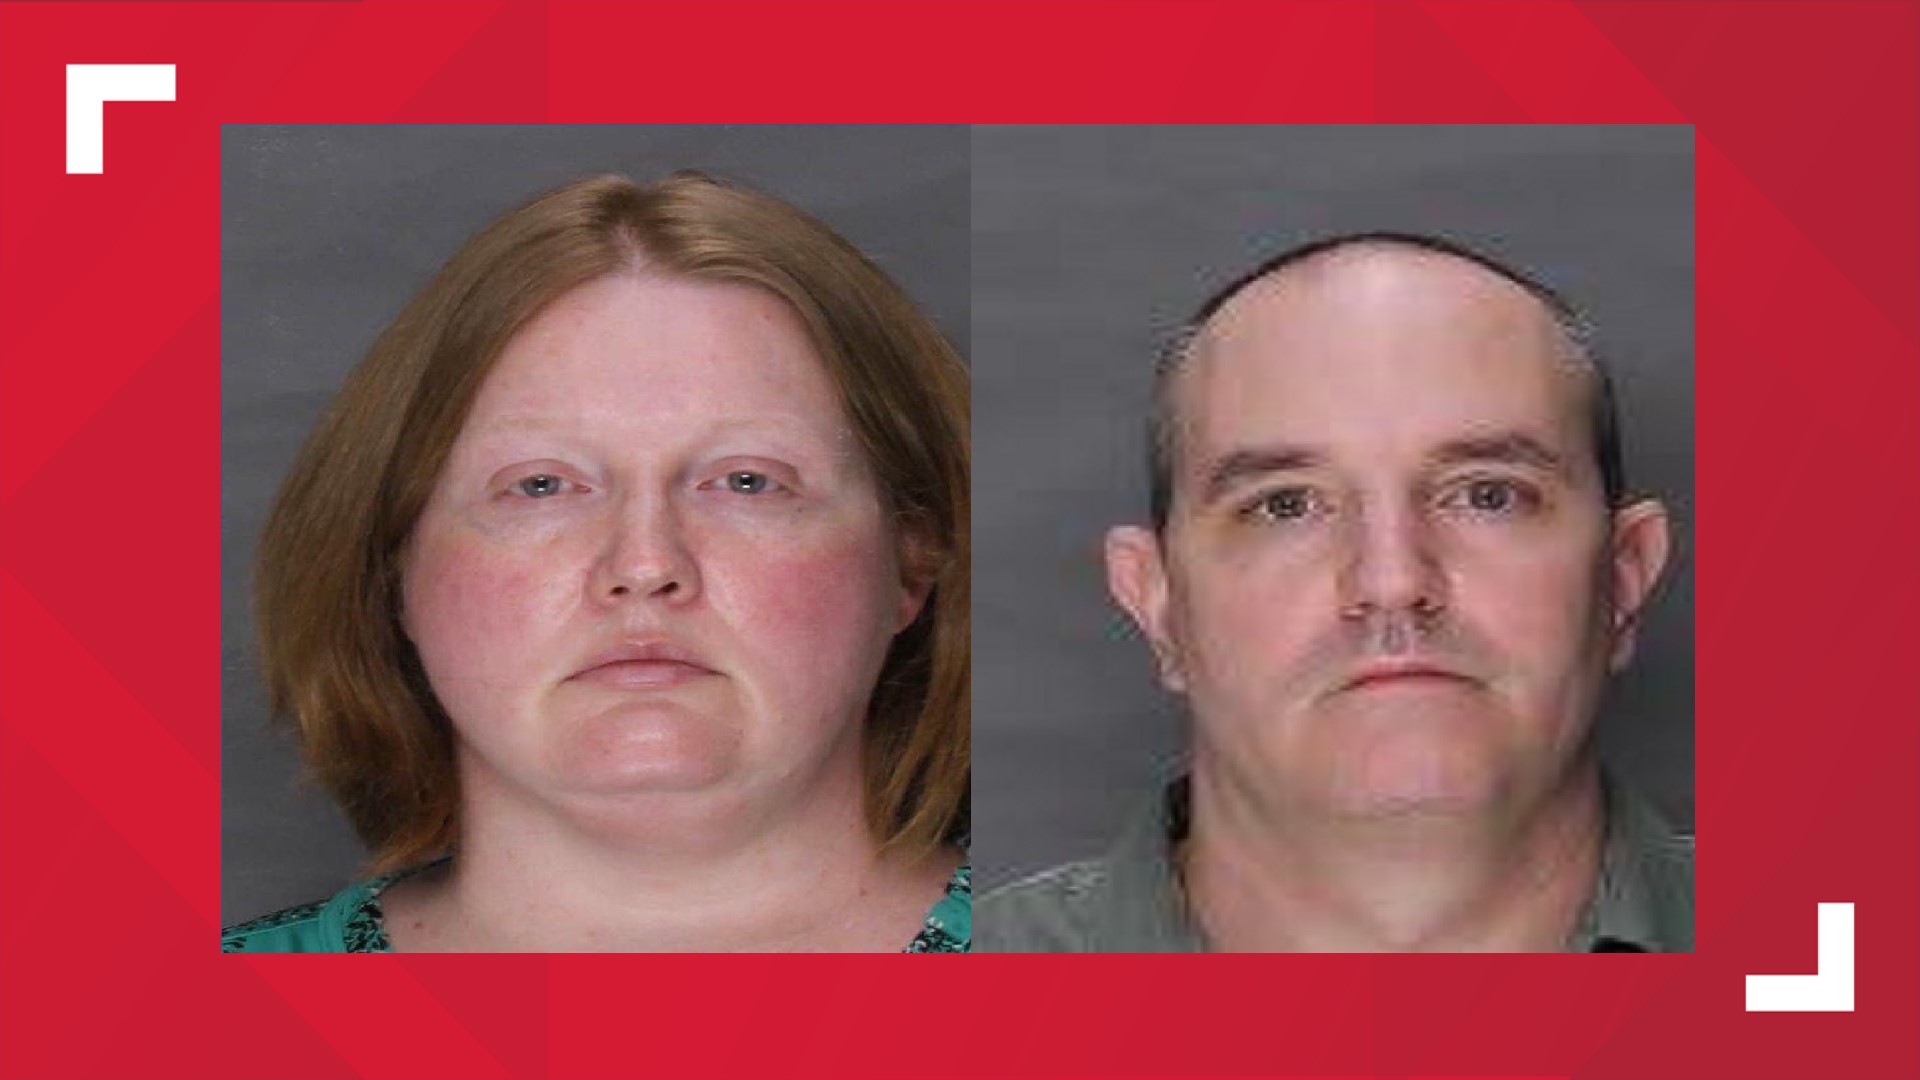 Stephanie and Robert Duncan are facing multiple felony charges for their role in the alleged prolonged assault and abuse of their five adopted children.